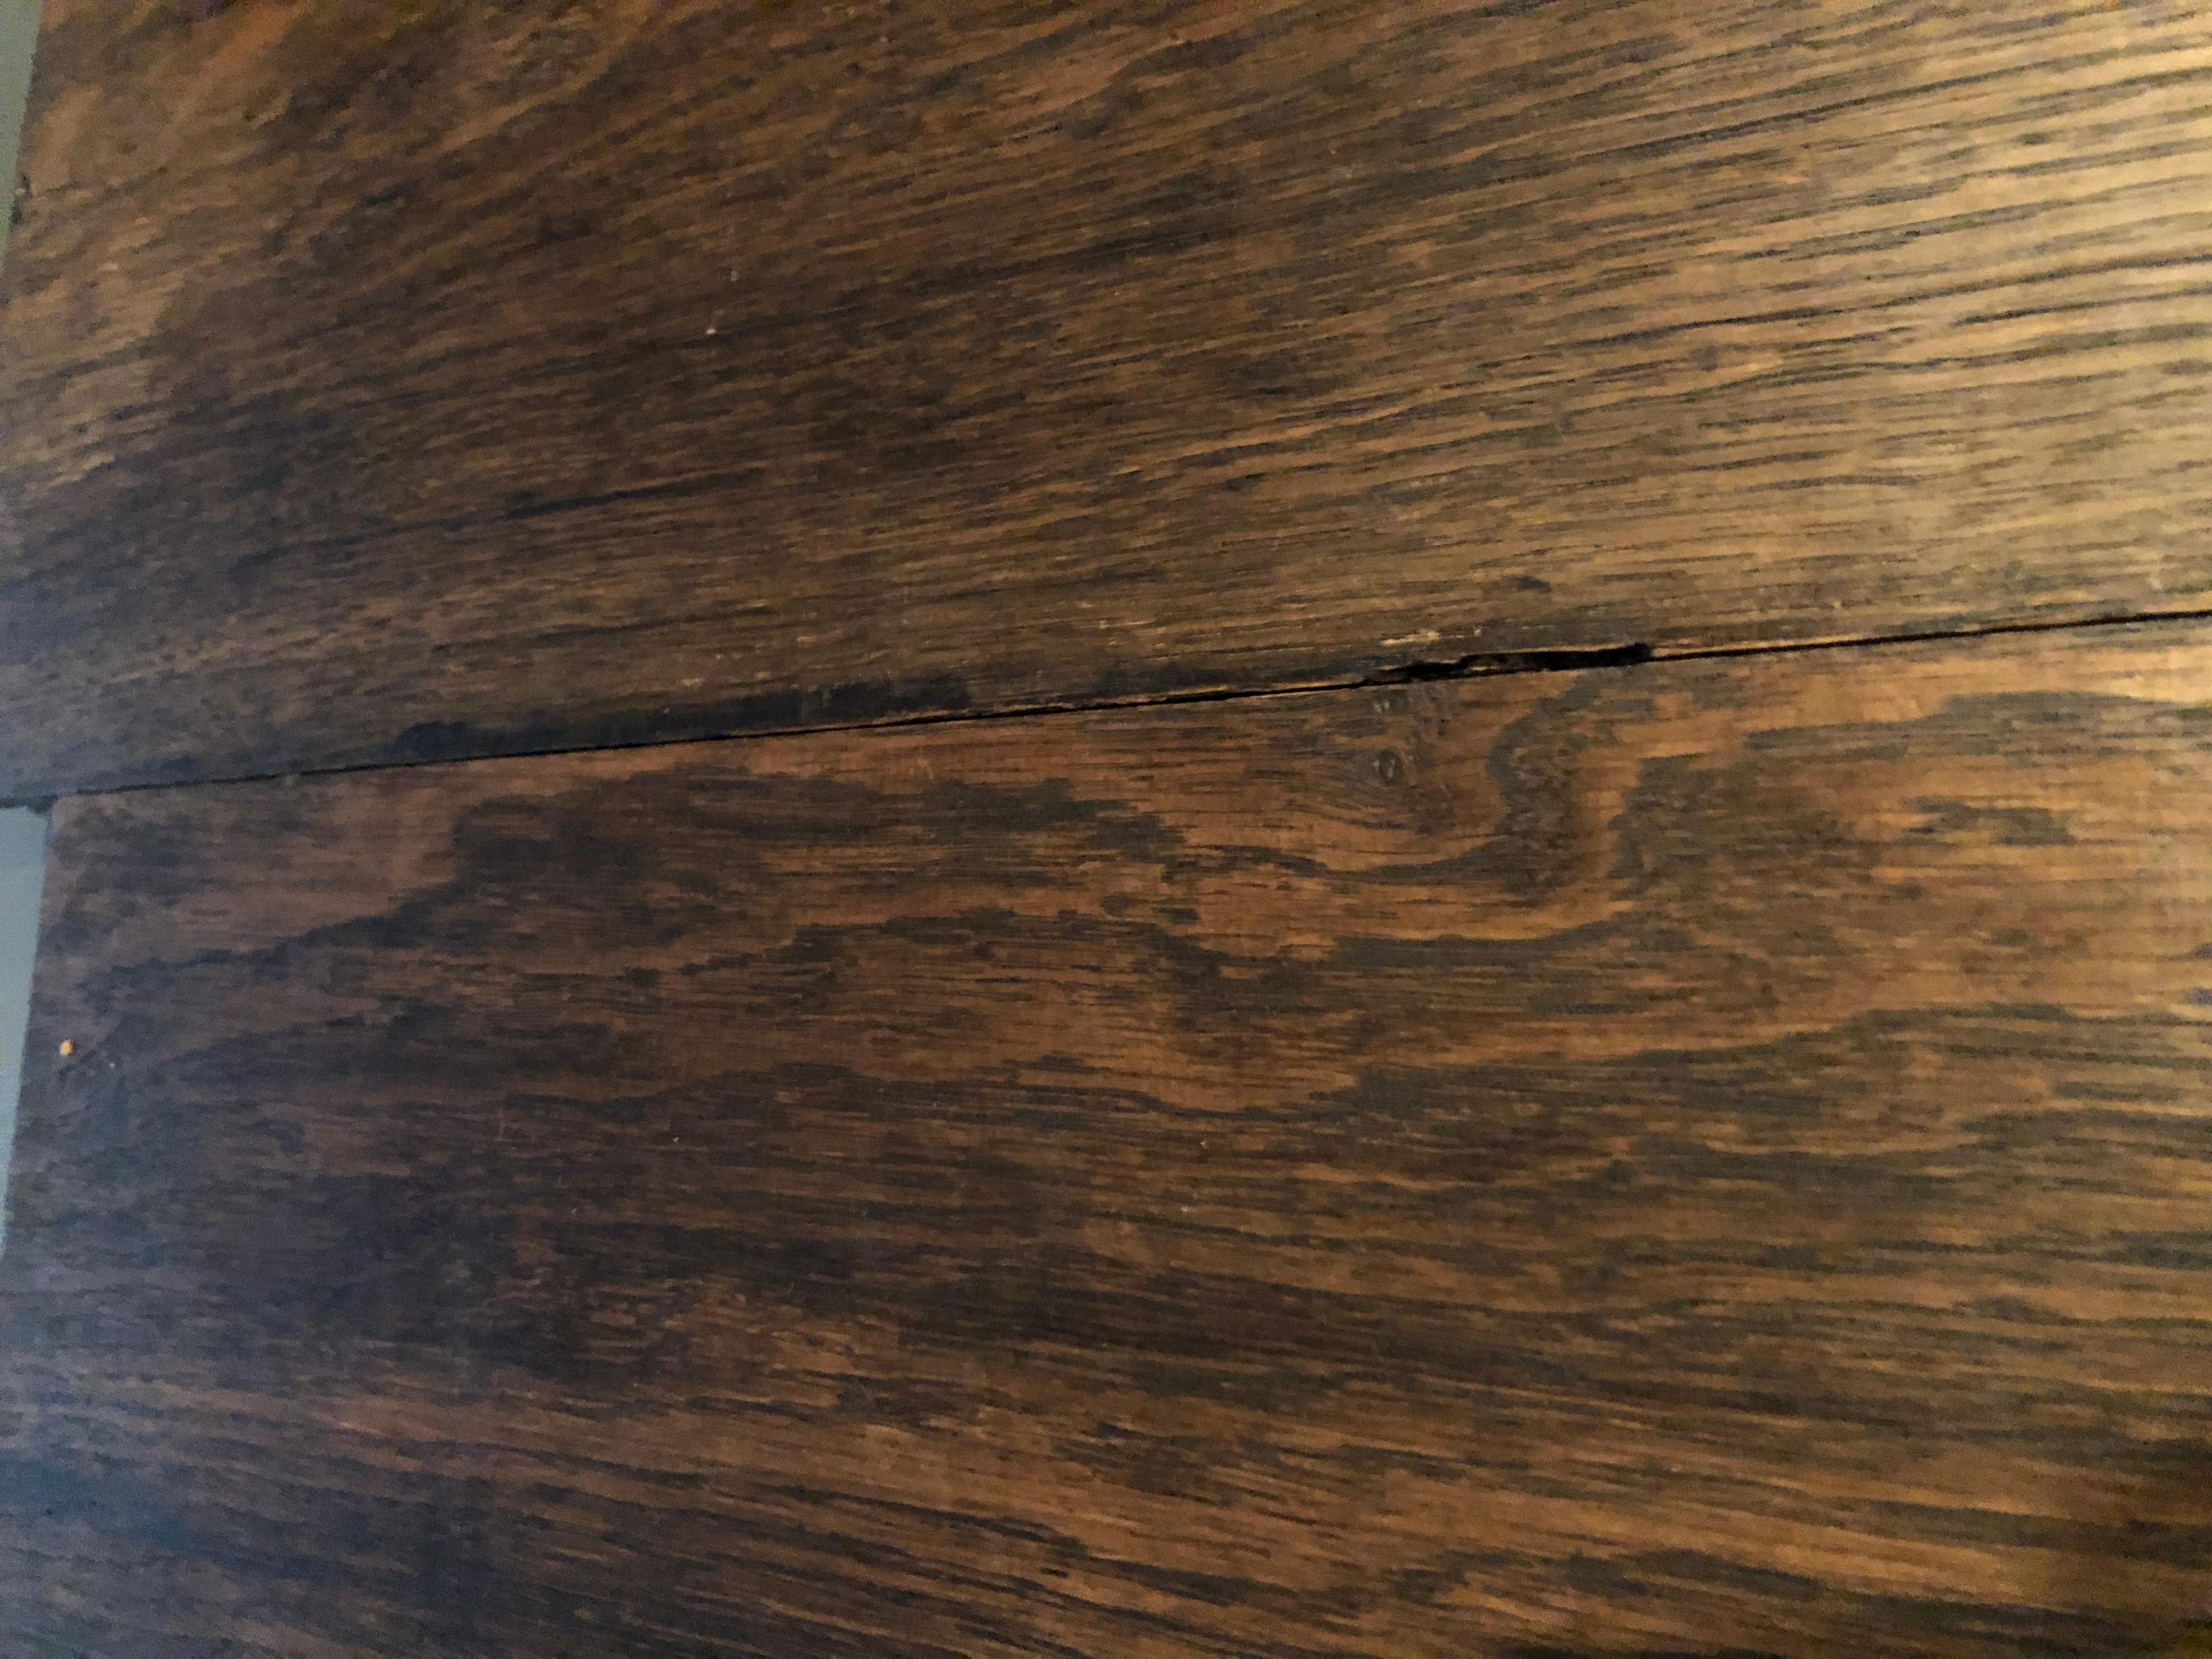 Original French Antique Solid Wood Oak Floors 18th Century, France For Sale 9